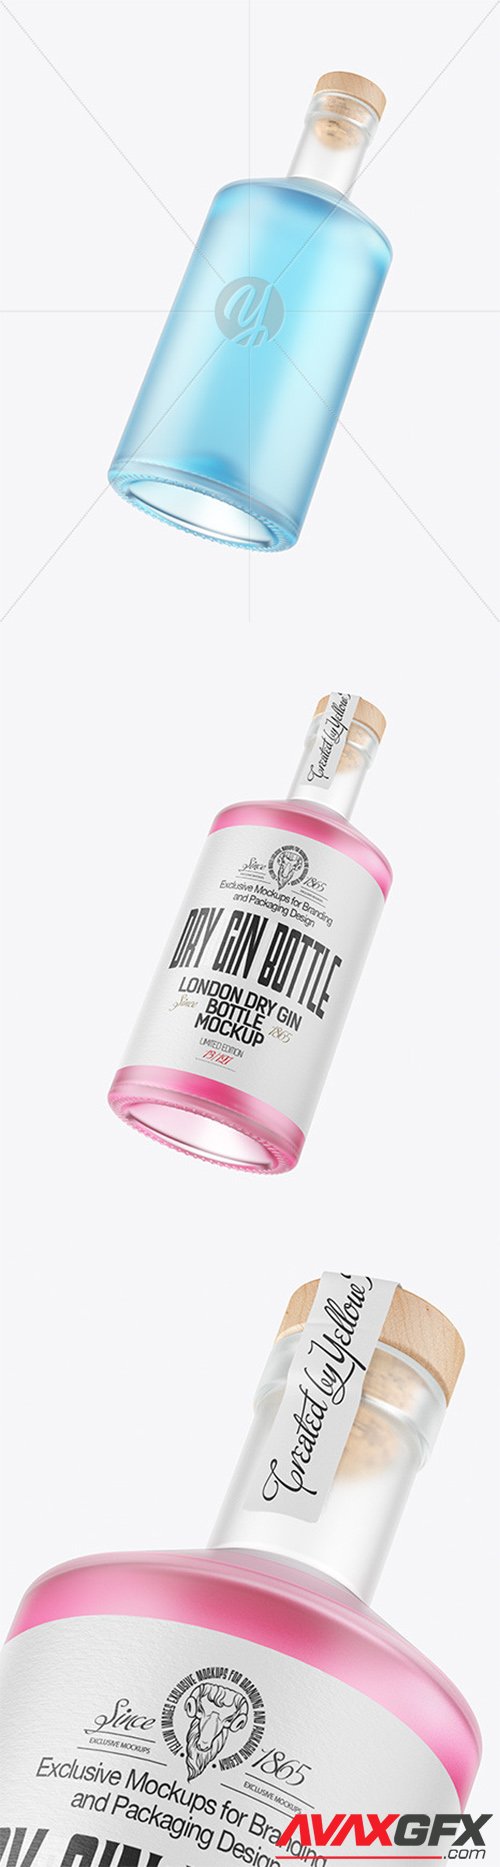 Frosted Glass Gin Bottle Mockup 82117